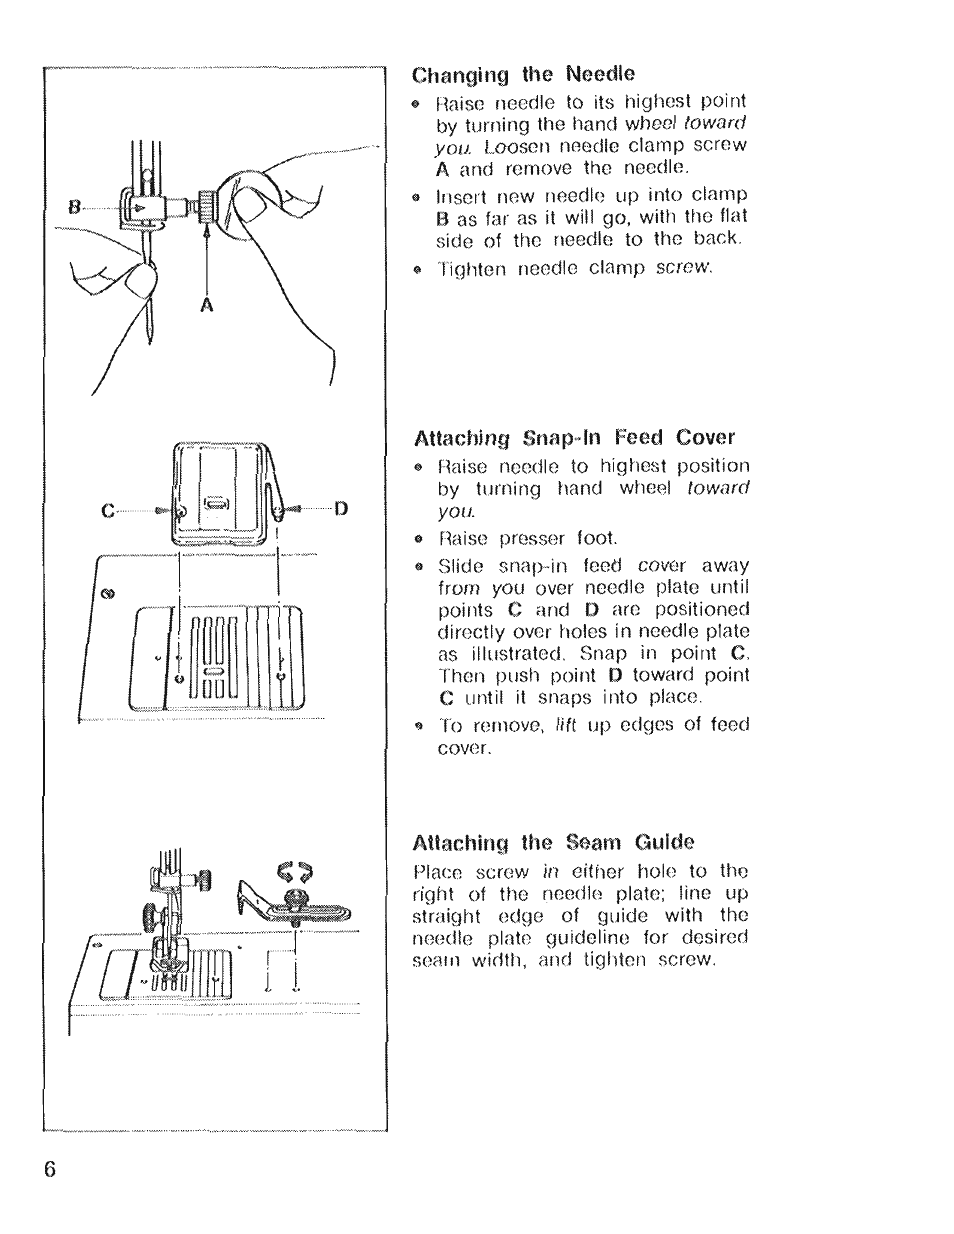 Changing the needle, Attaching snap-in feed cover, Attaching the seam guide | SINGER 4022 User Manual | Page 8 / 56